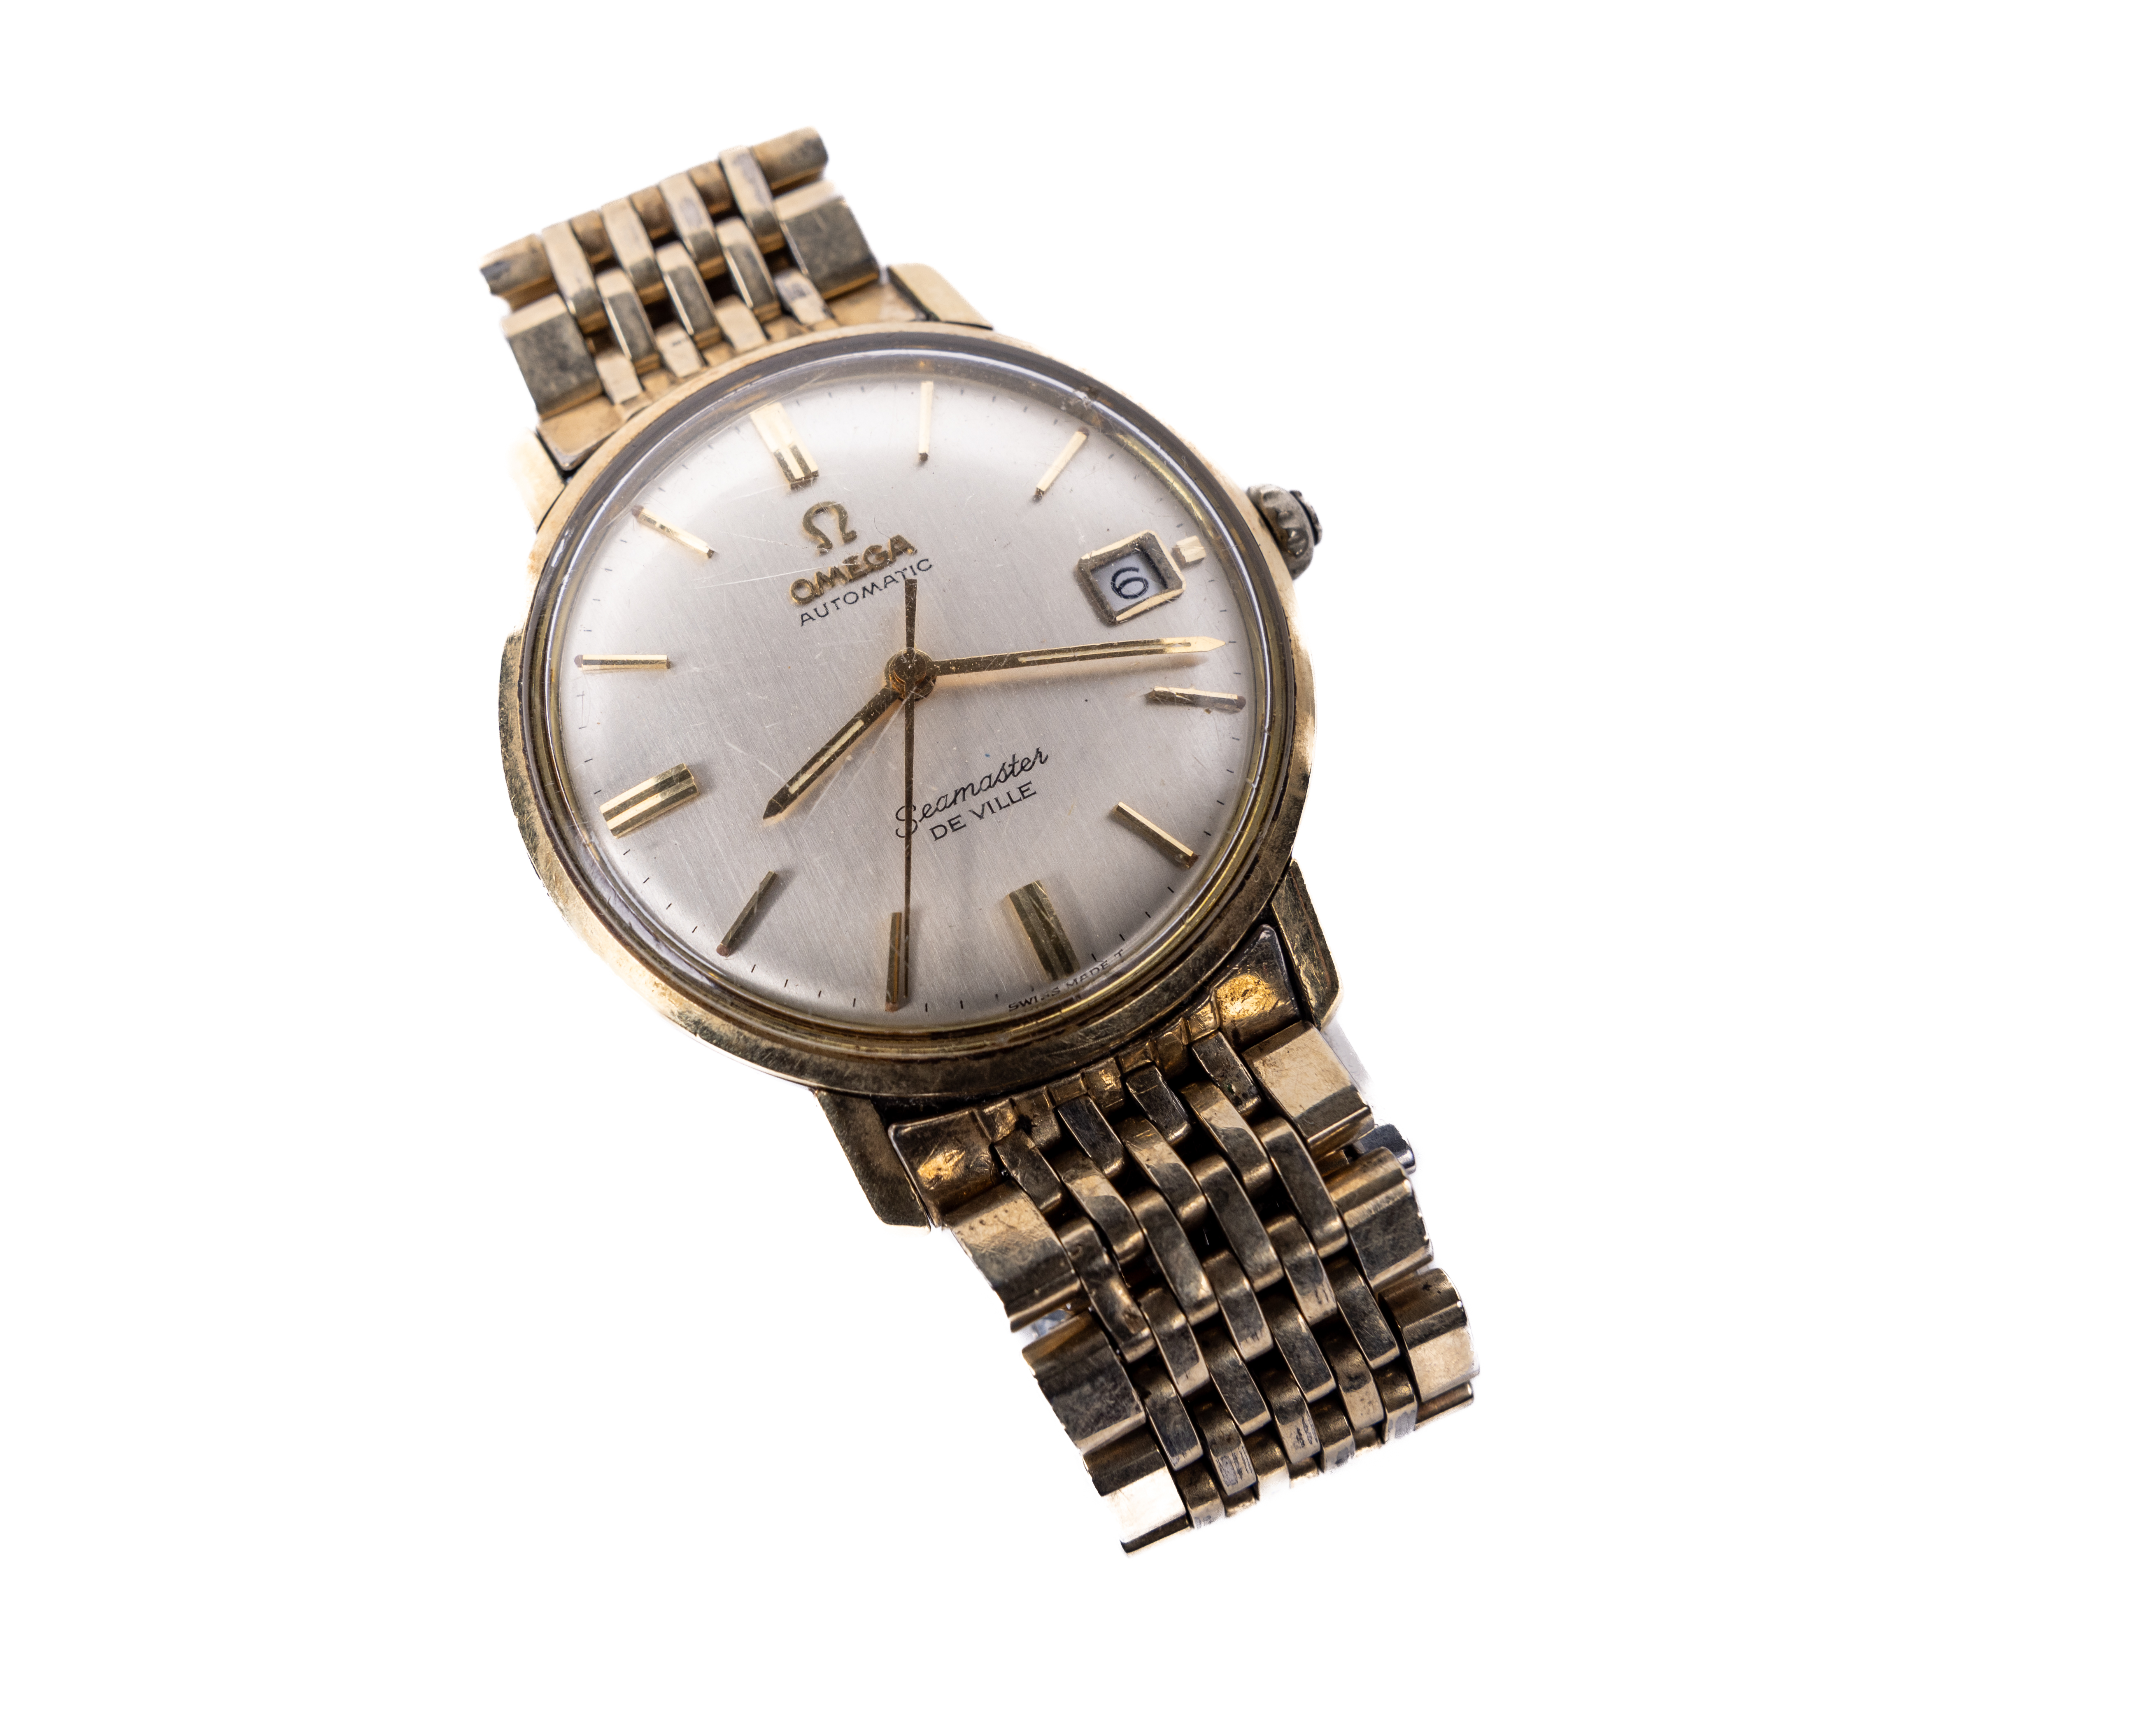 An Omega Automatic - Seamaster De Ville Gentleman's Wrist Watch, with oyster dial, Roman numerals